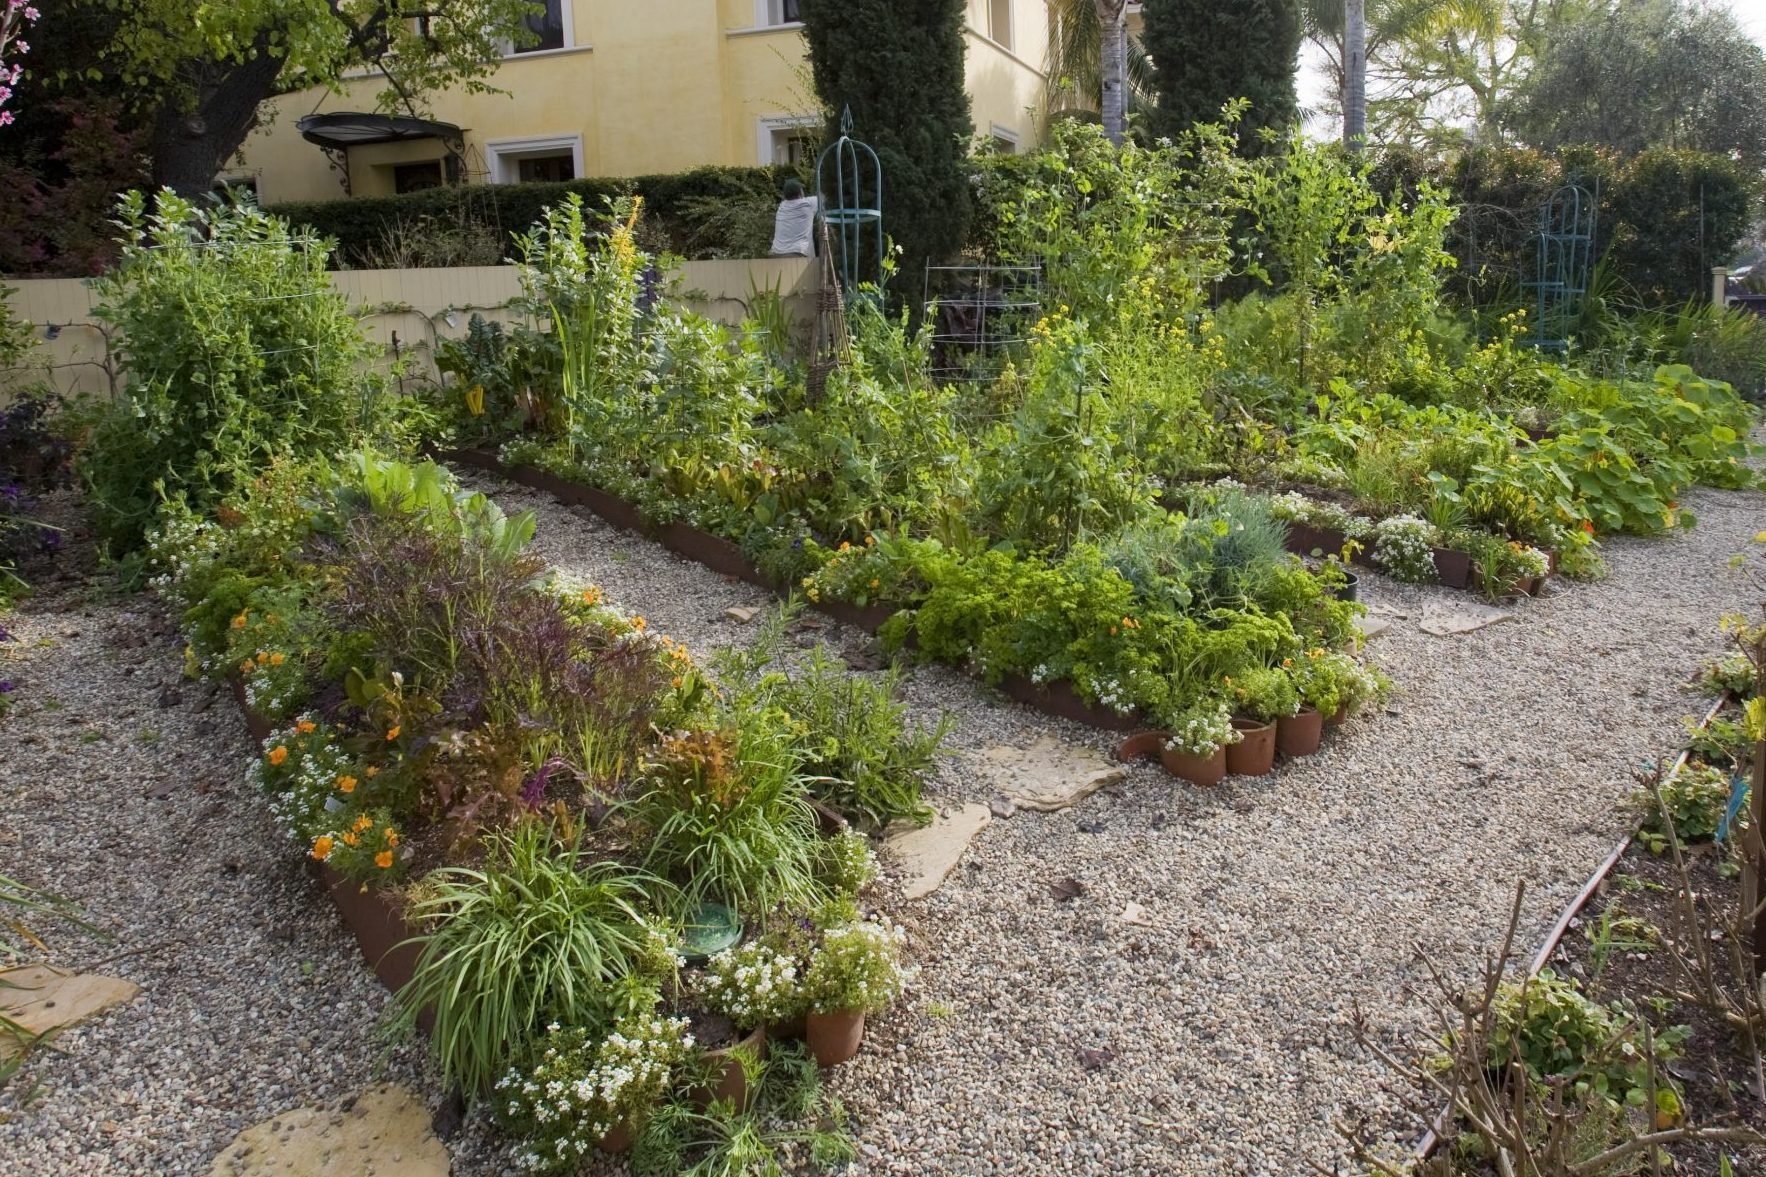 A Guide To Sustainable Gardening